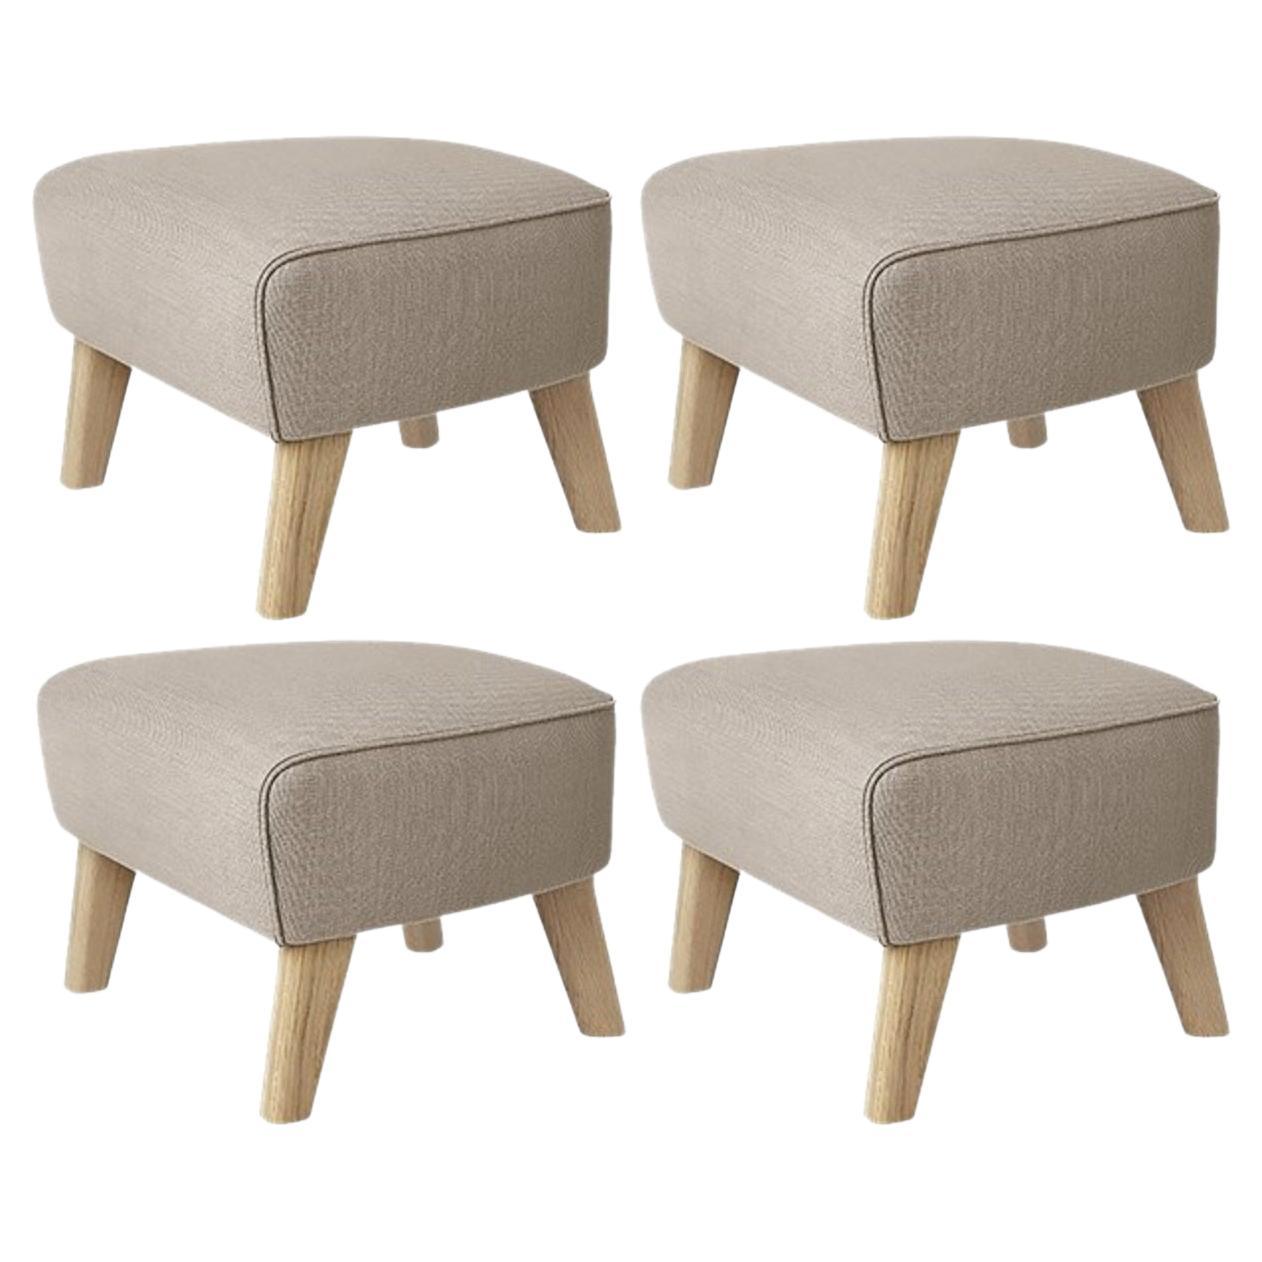 Set of 4 Beige and Natural Oak Sahco Zero Footstool by Lassen For Sale